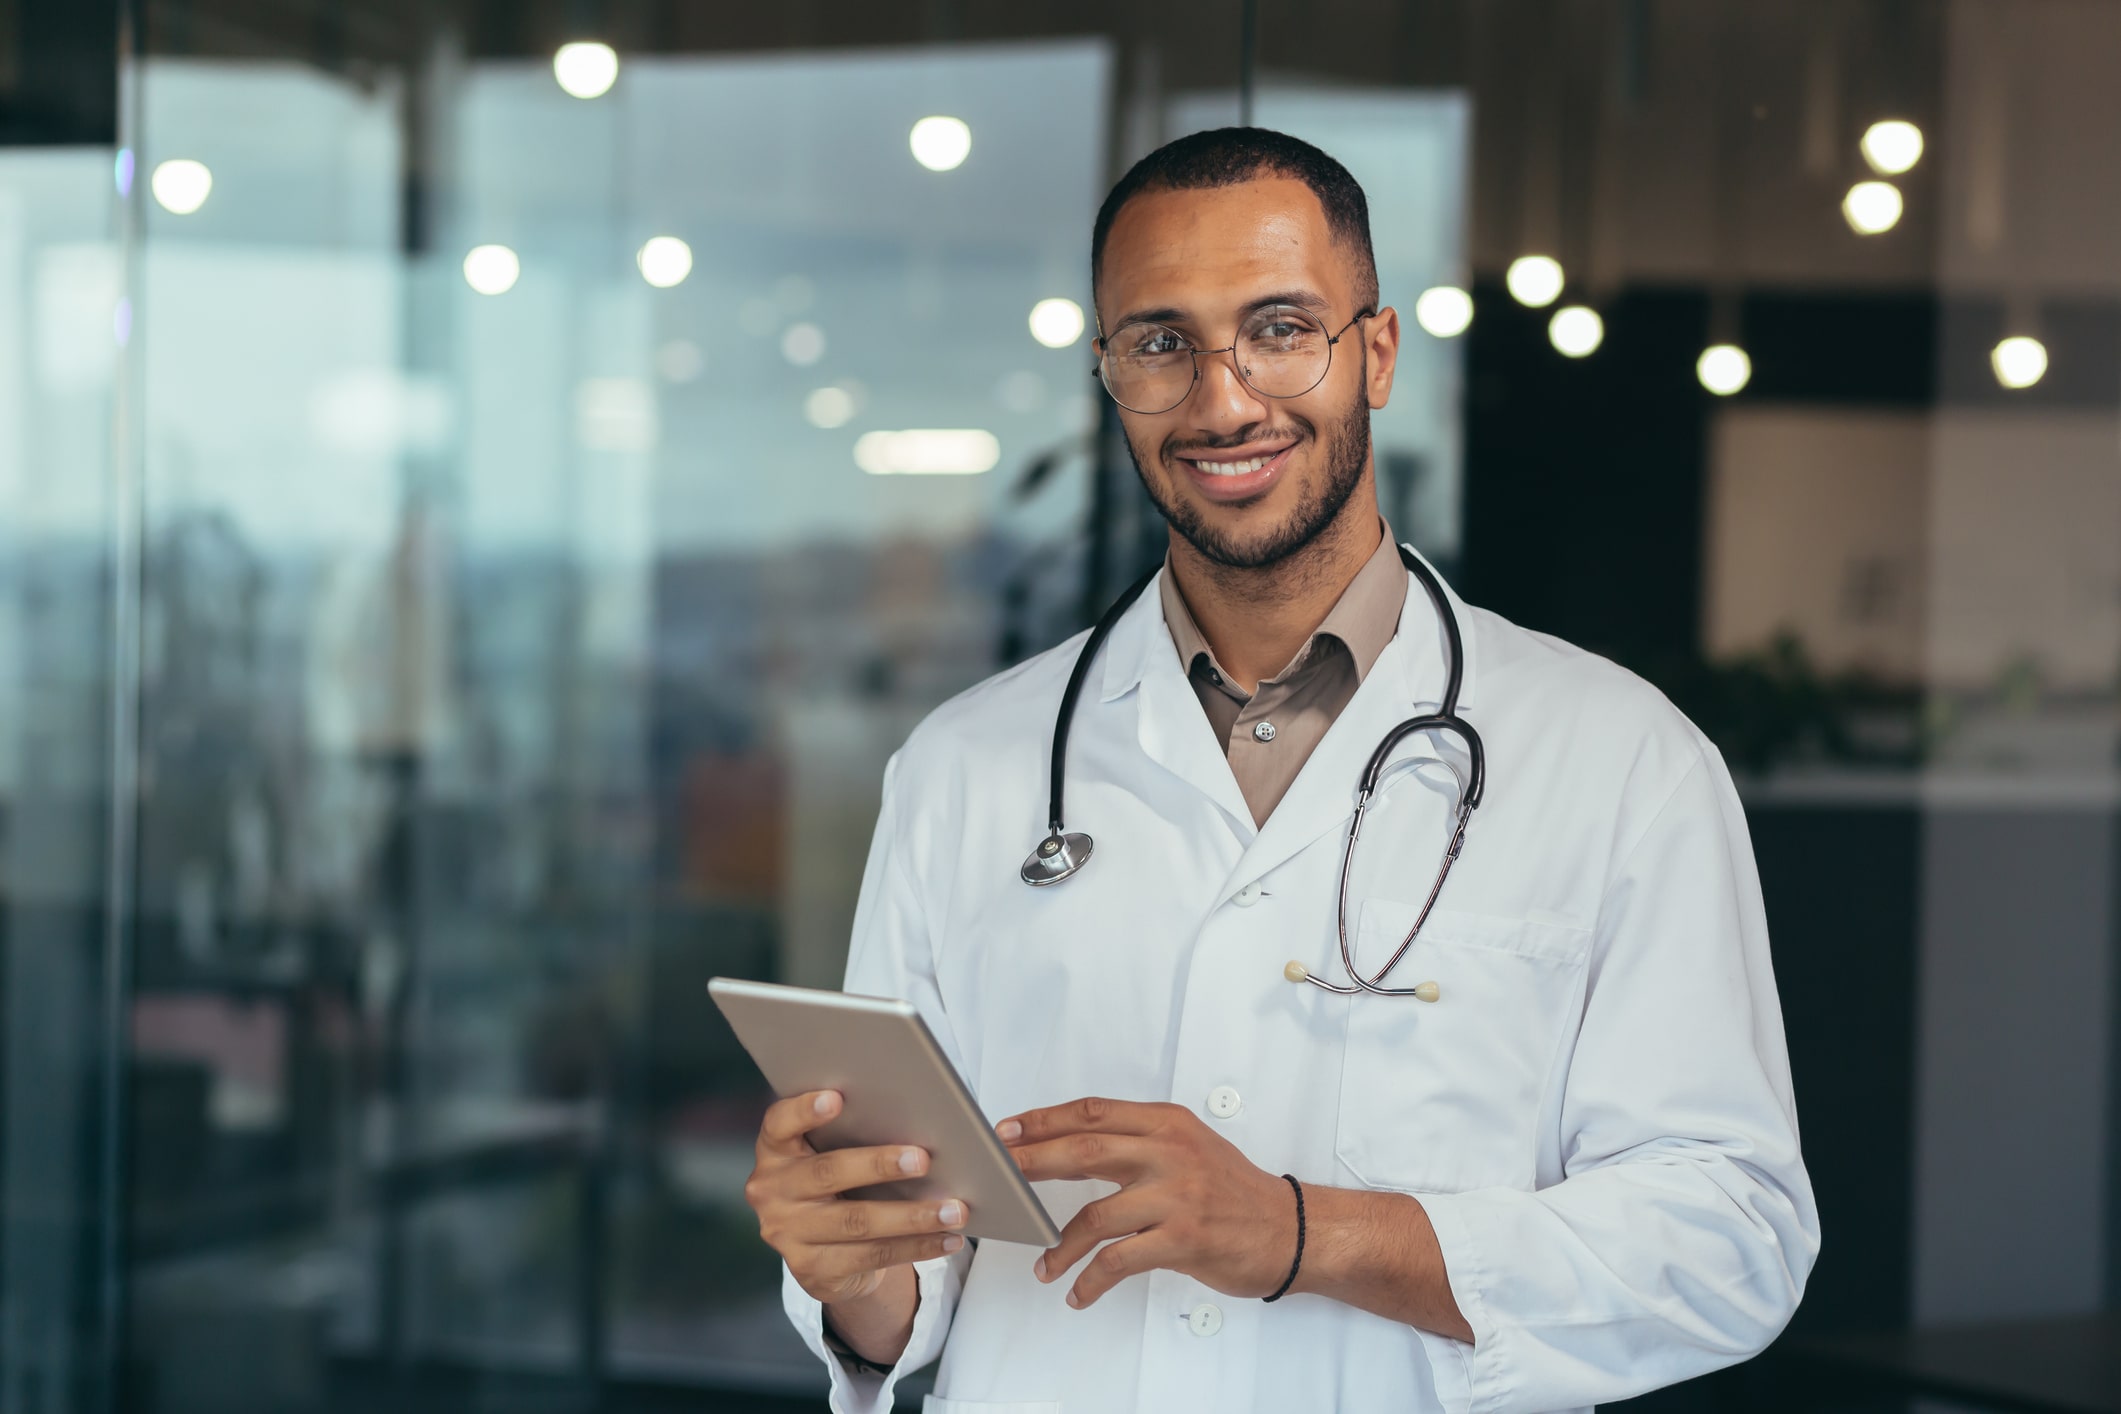 Your Physician Practice: Modernizing Yet Independent